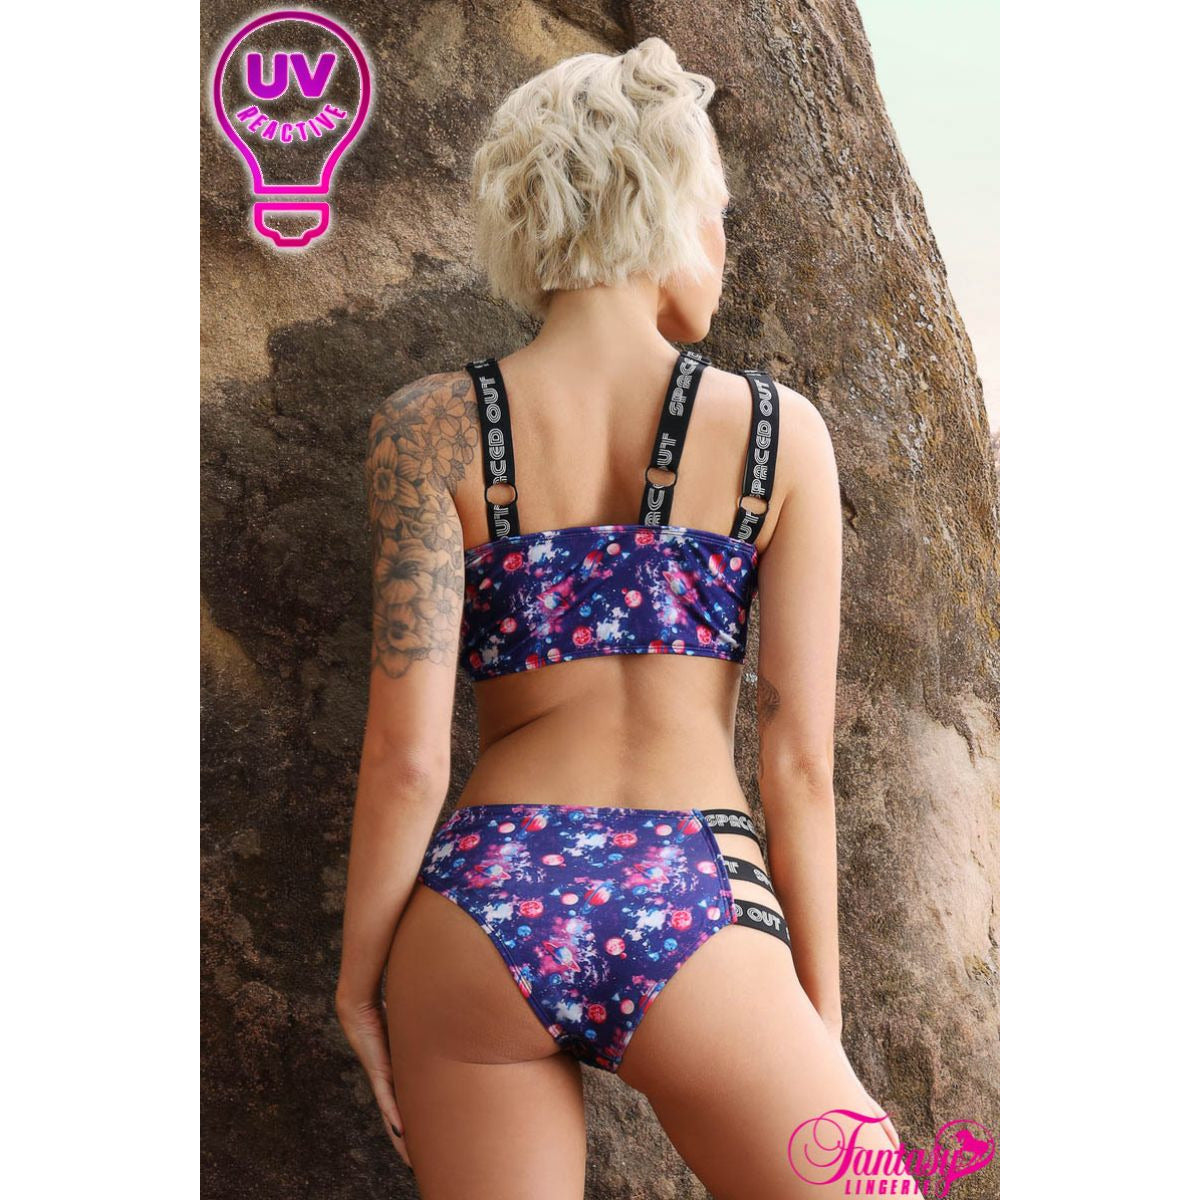 Vibes Spaced Out Top & Bottoms by Fantasy Lingerie